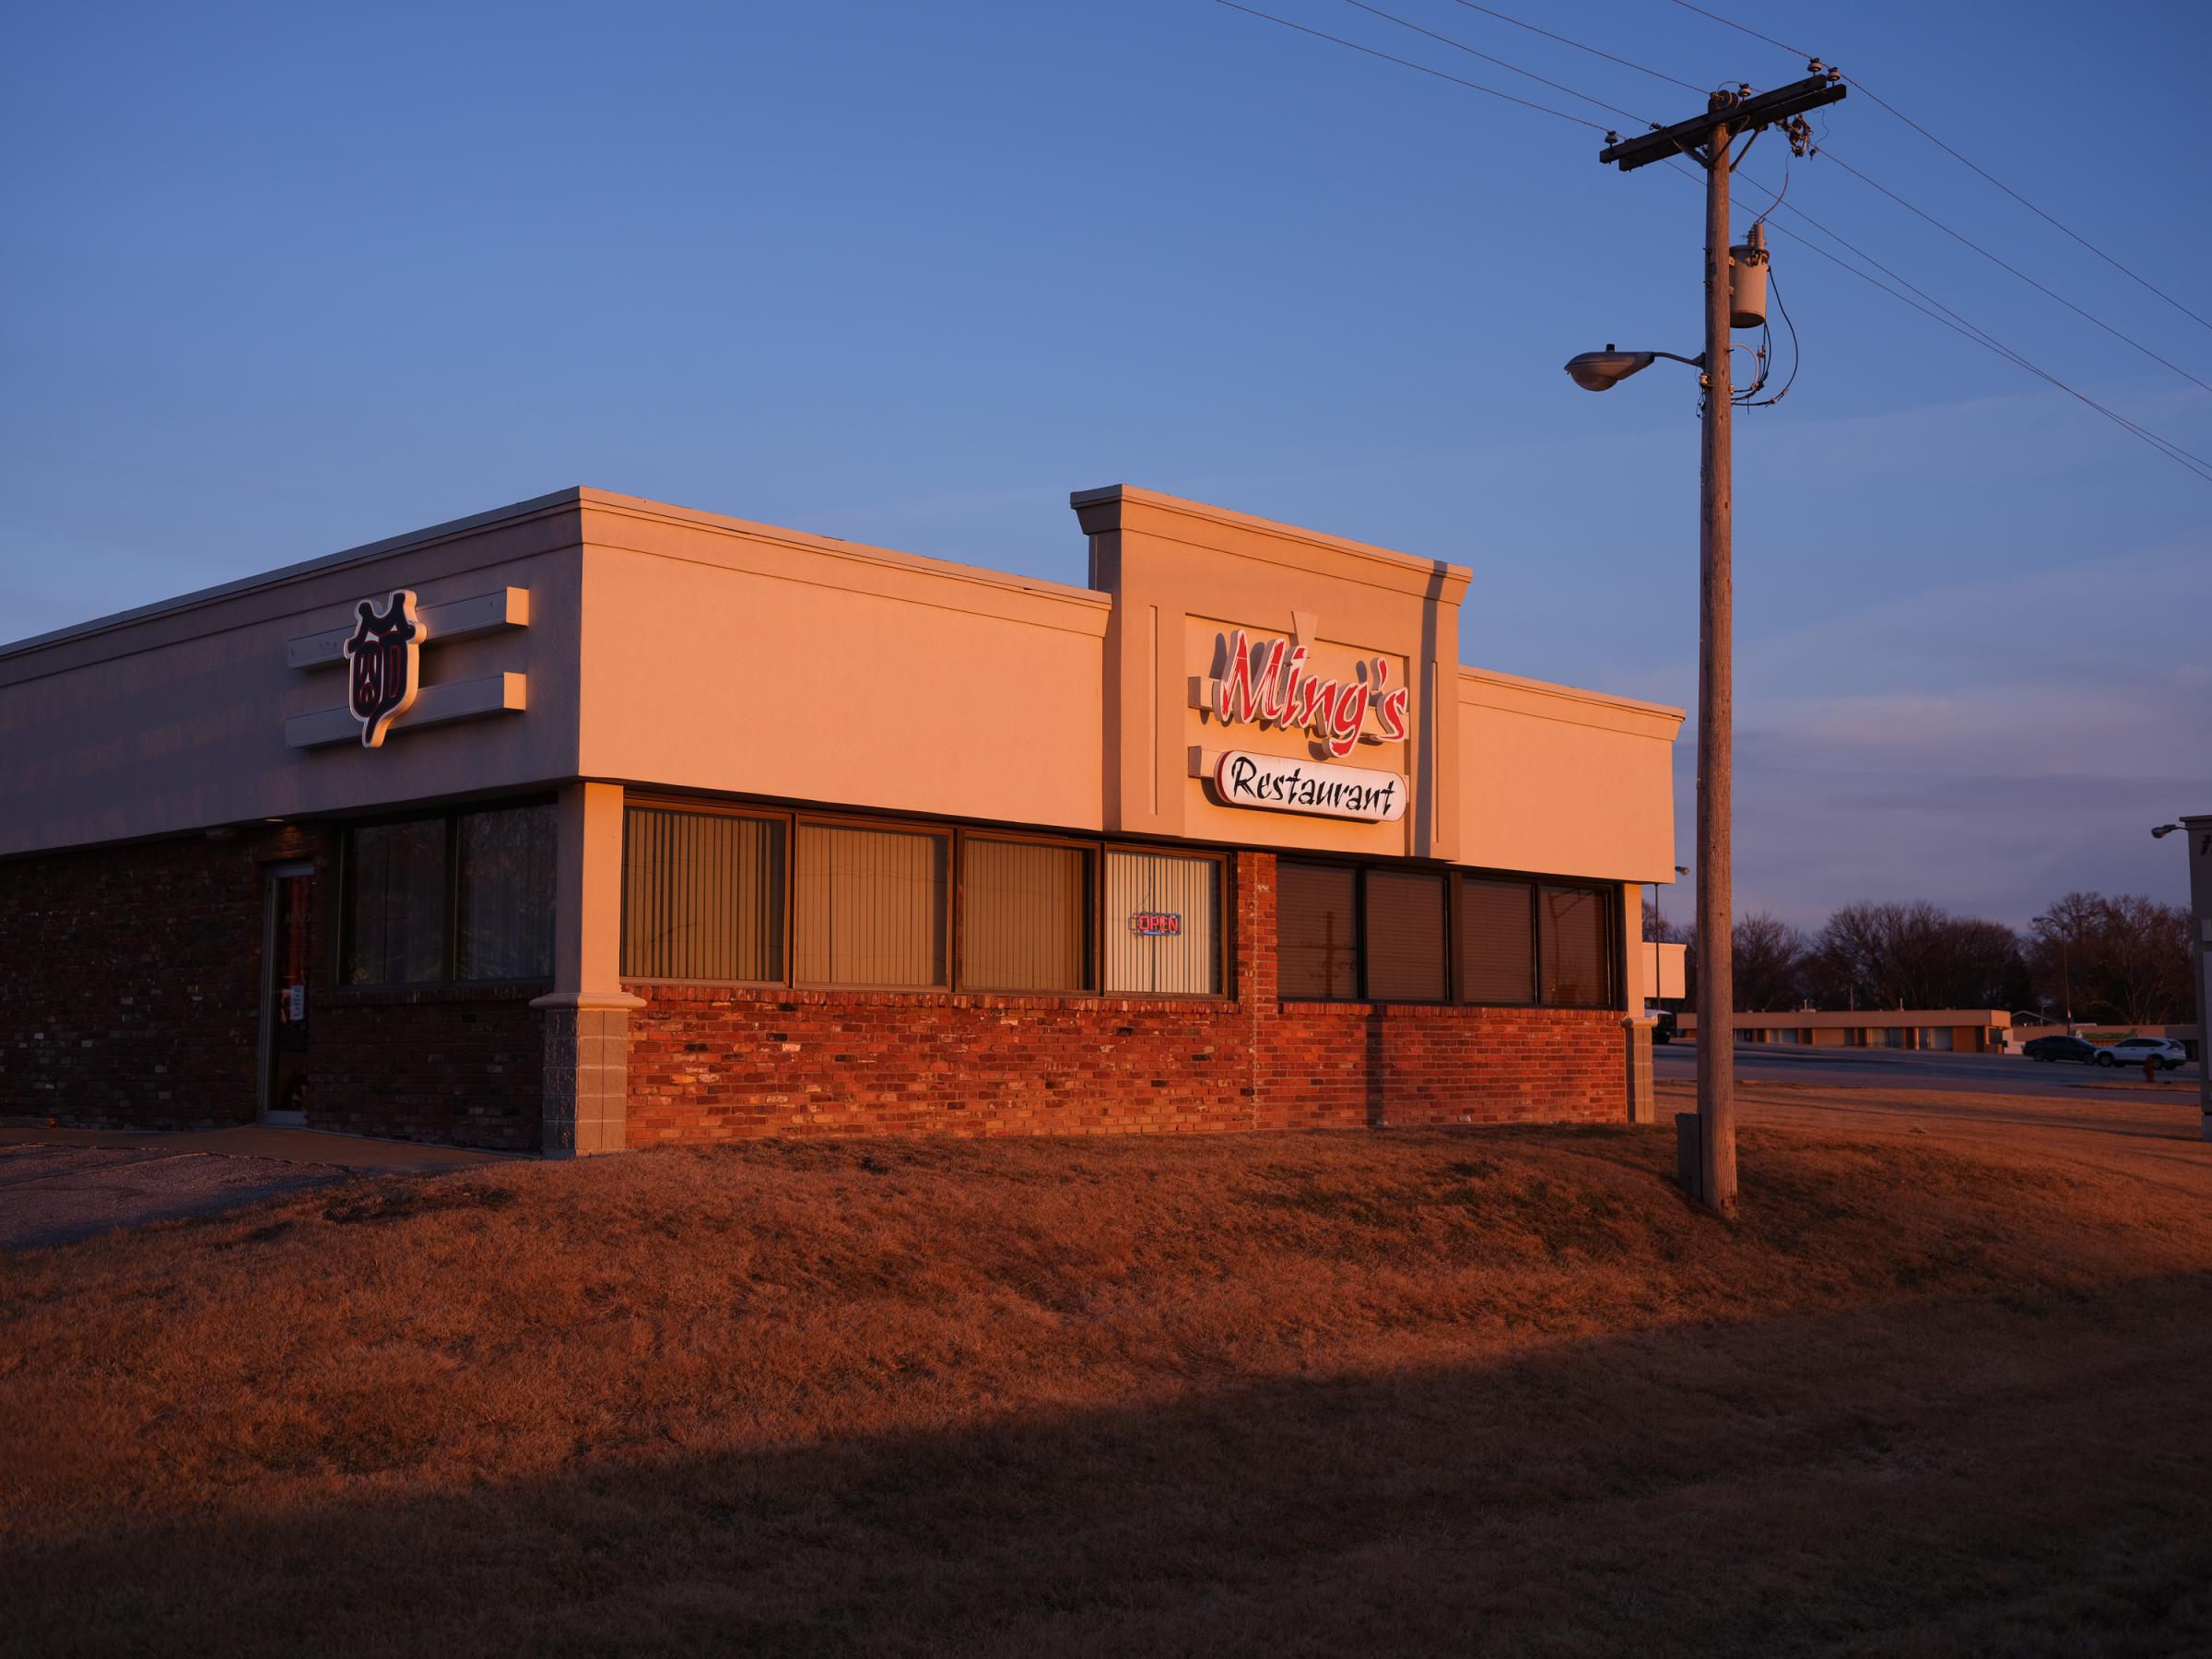 PAPILLION, NE - MARCH 18, 2022: Exterior view of Ming&#39;s Restaurant in Papillion, Nebraska on March 18, 2022. (Photo by Arin Yoon for The Washington Post) Papillion United States